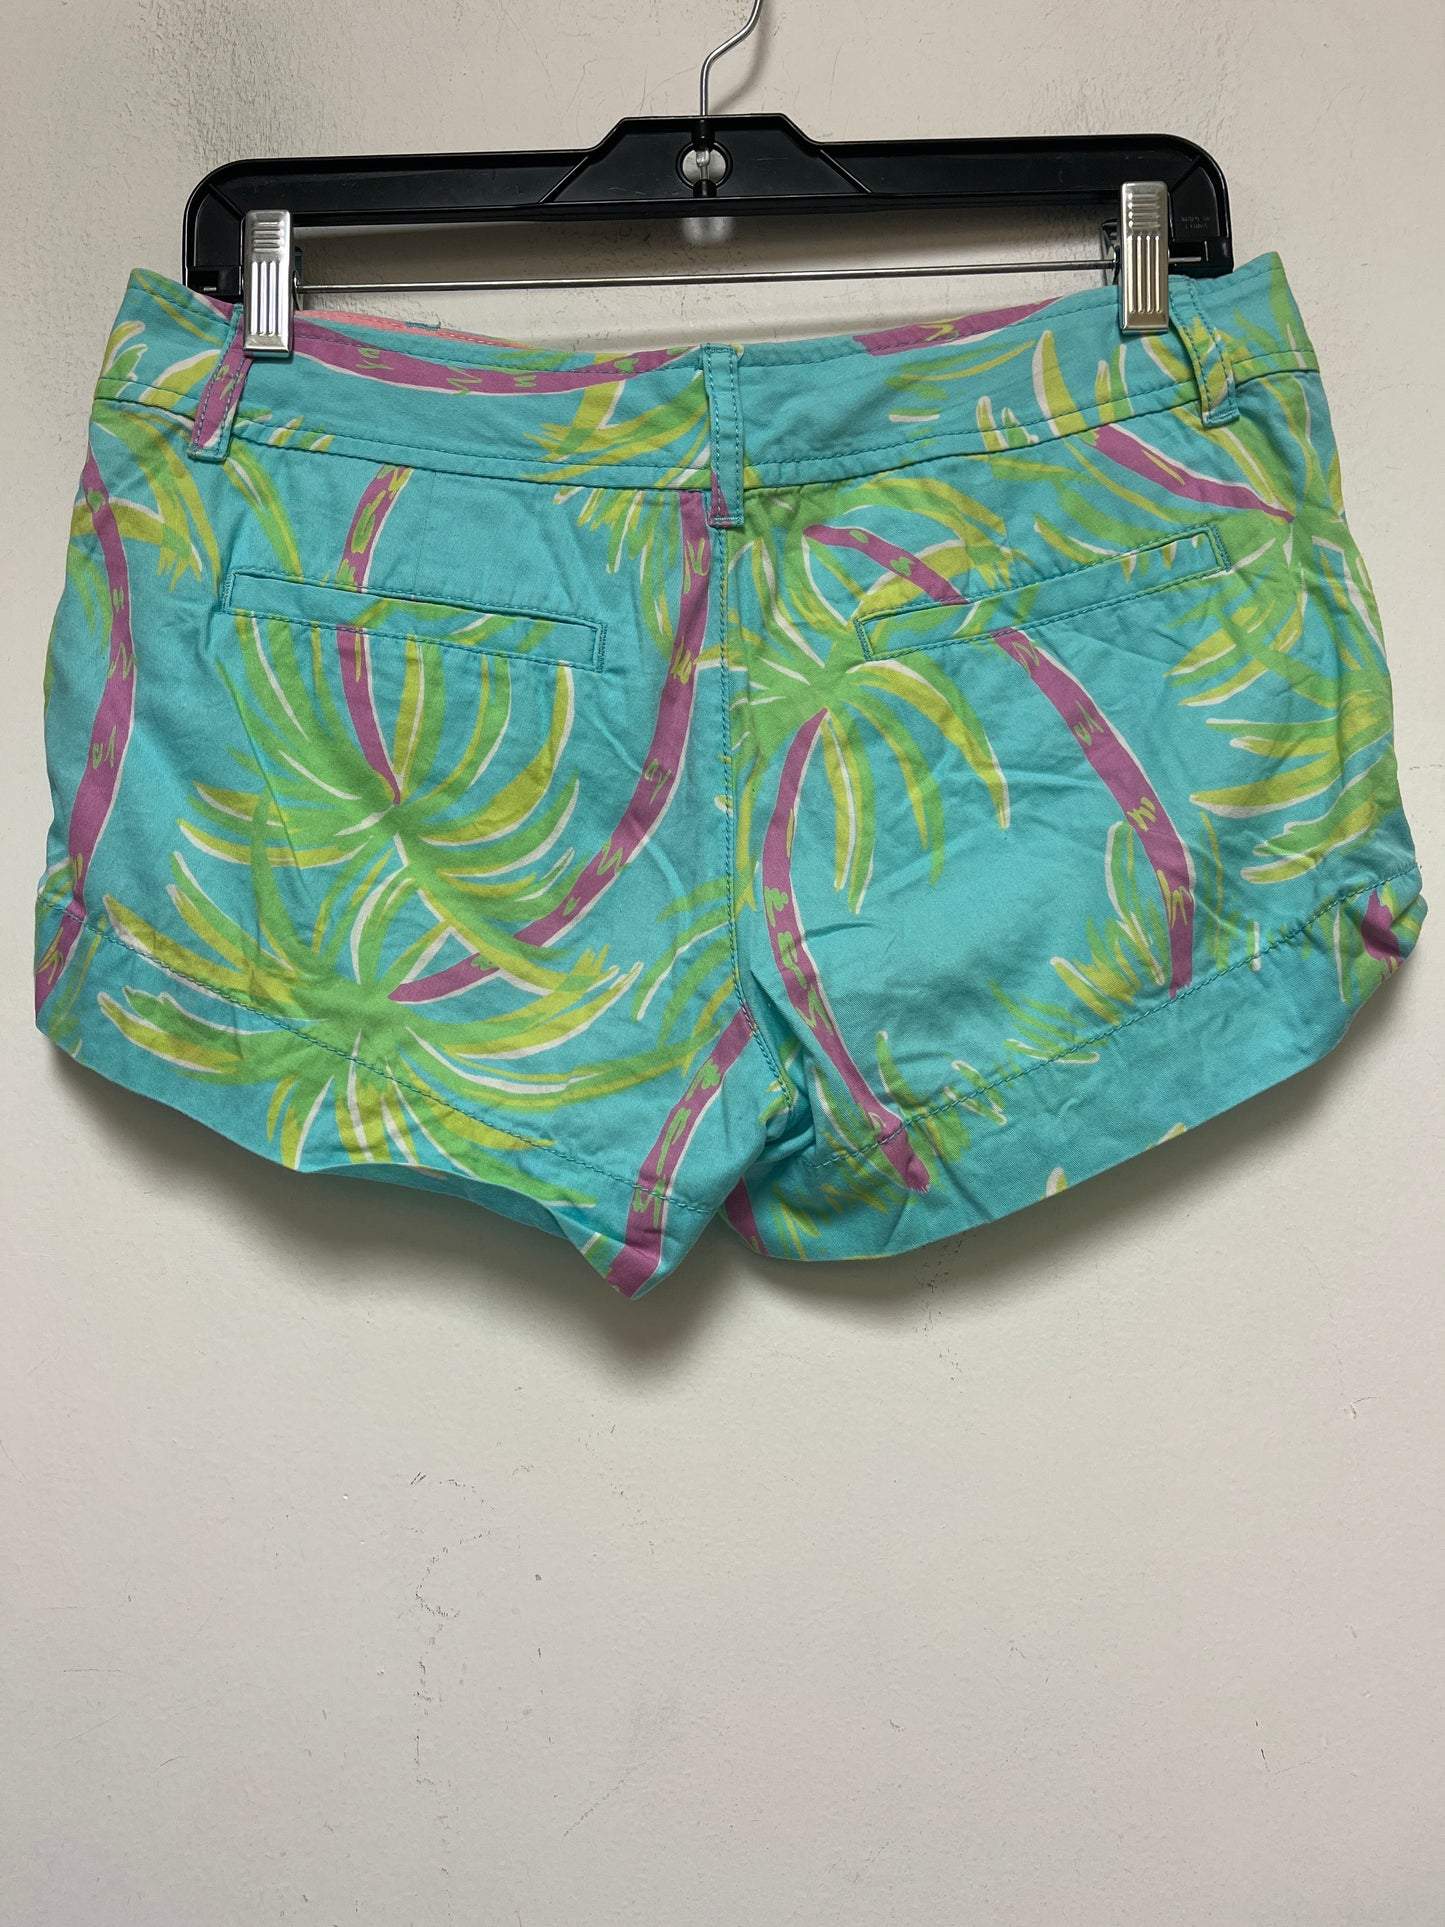 Tropical Print Shorts Lilly Pulitzer, Size 4